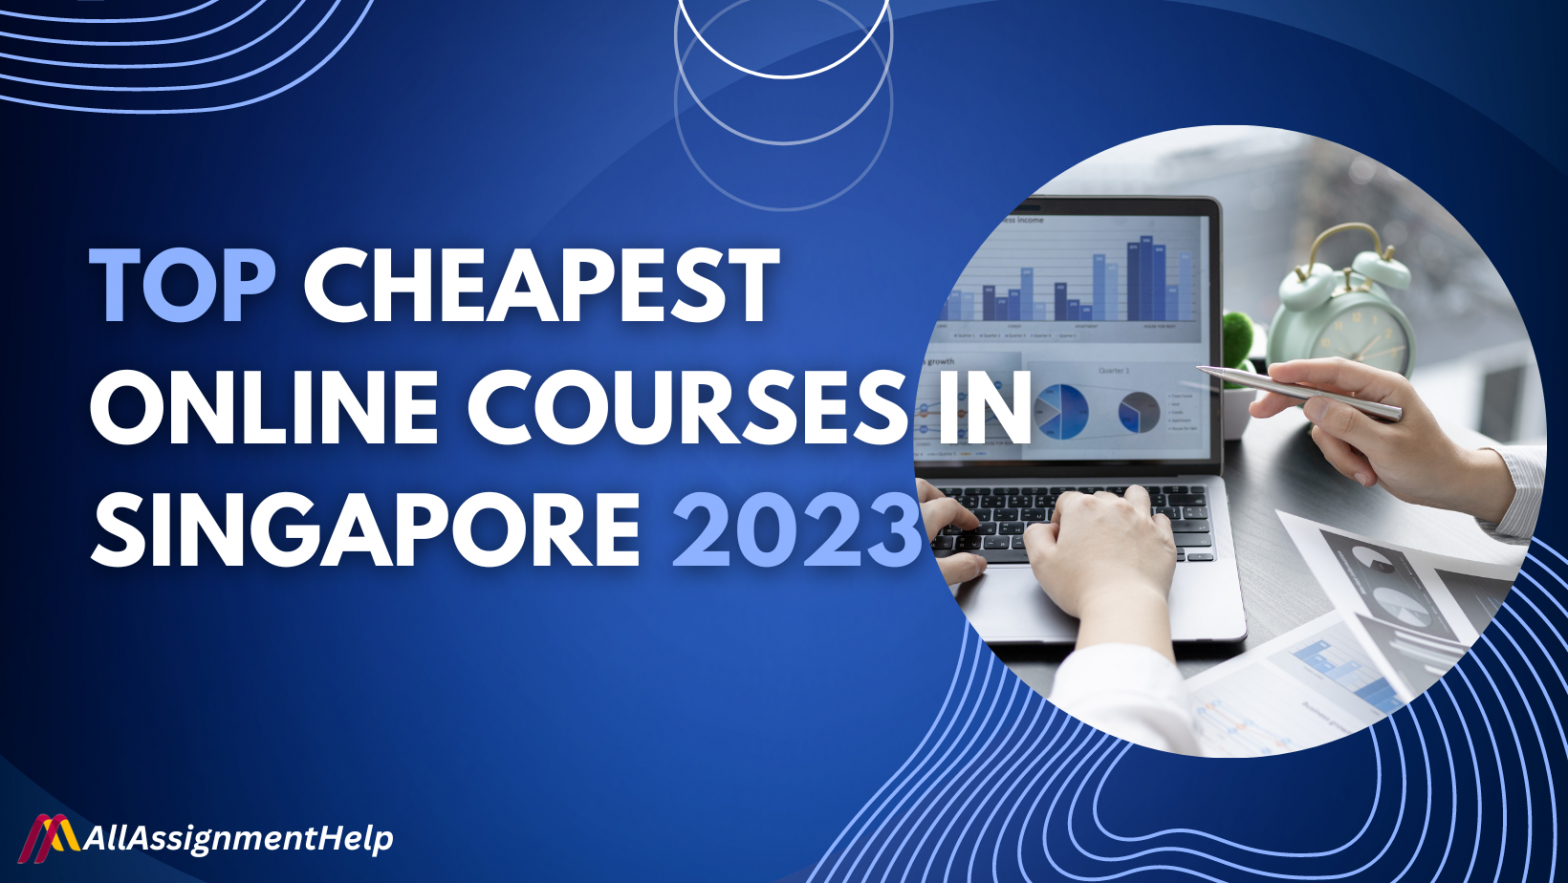 Online courses in Singapore